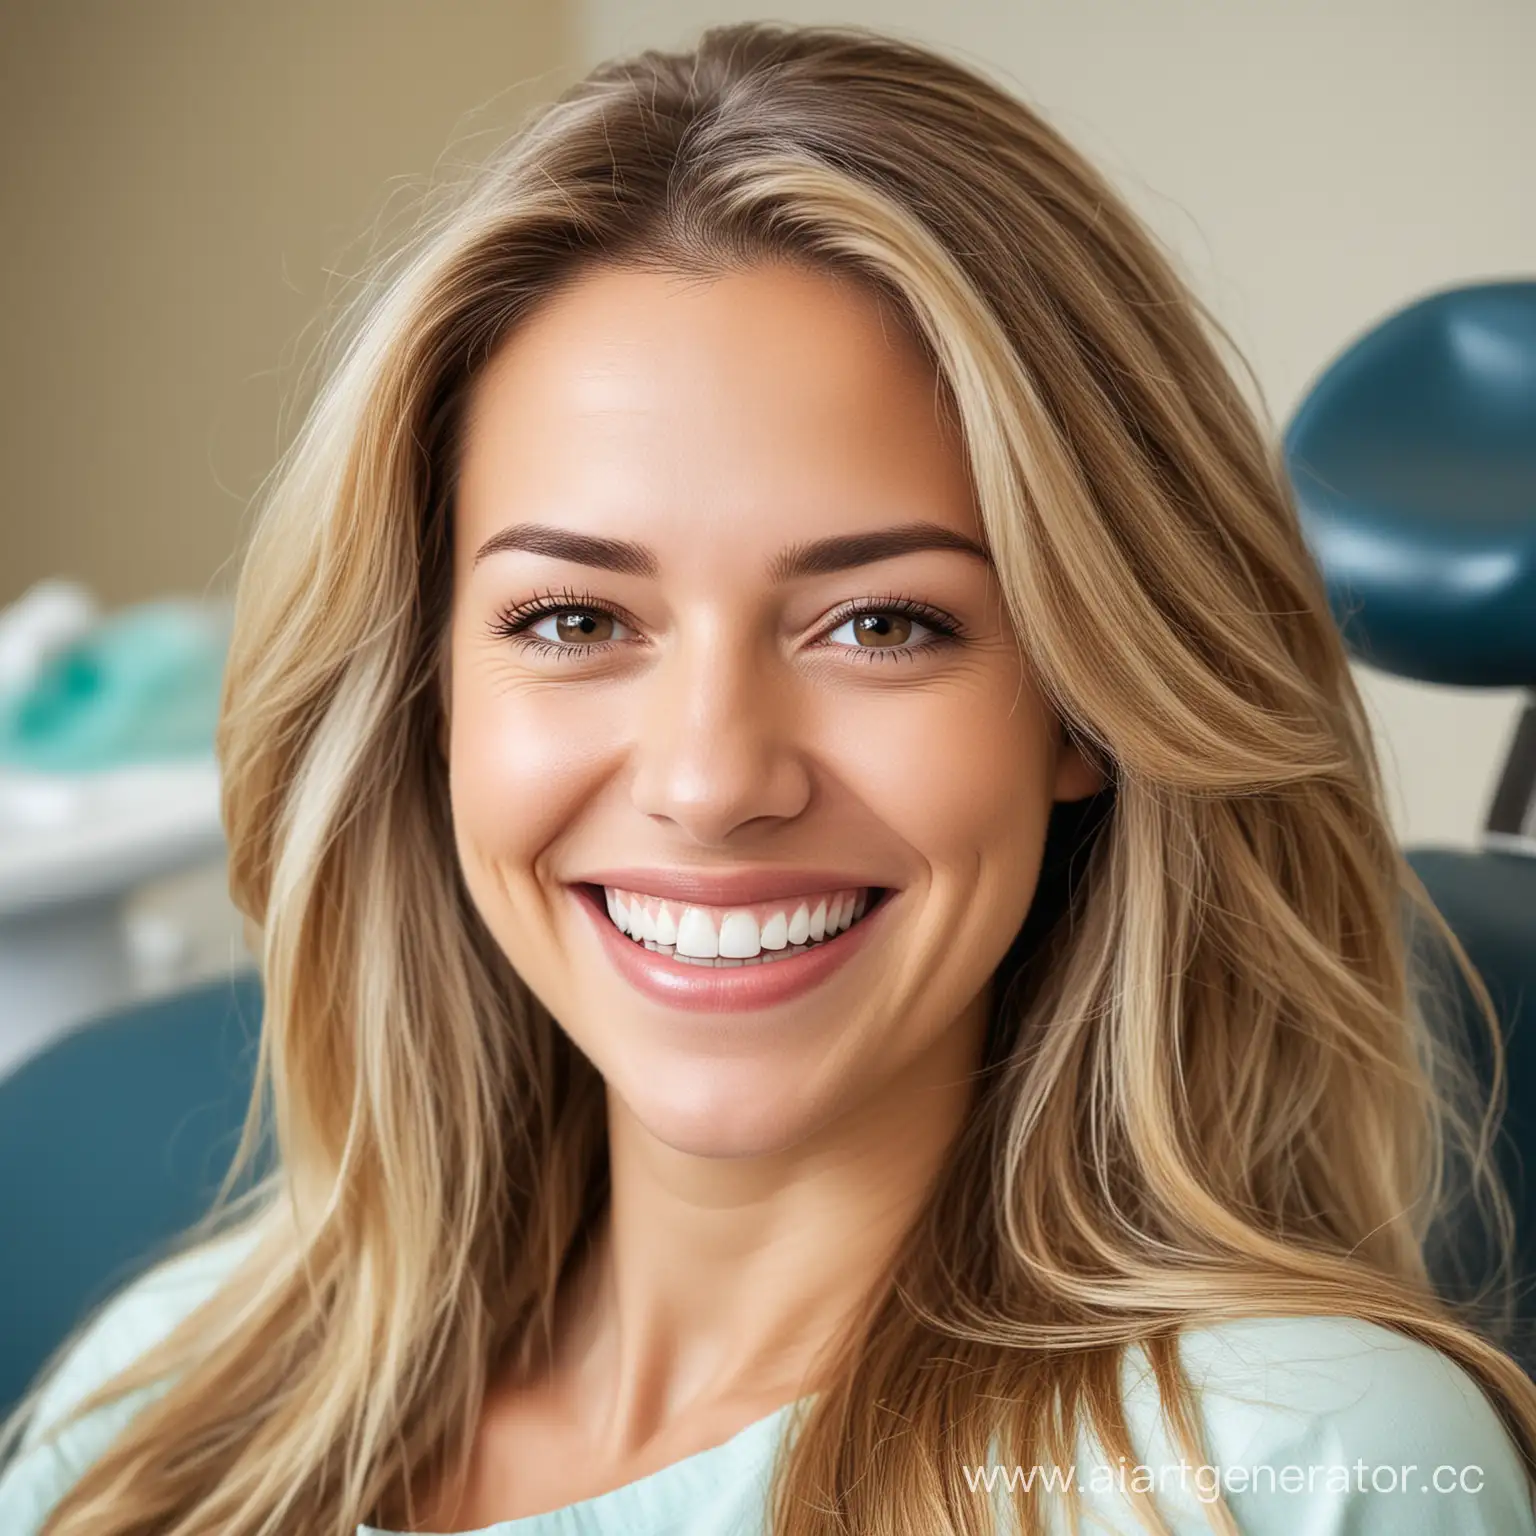 Smiling-Woman-with-Long-Hair-in-Dentists-Chair